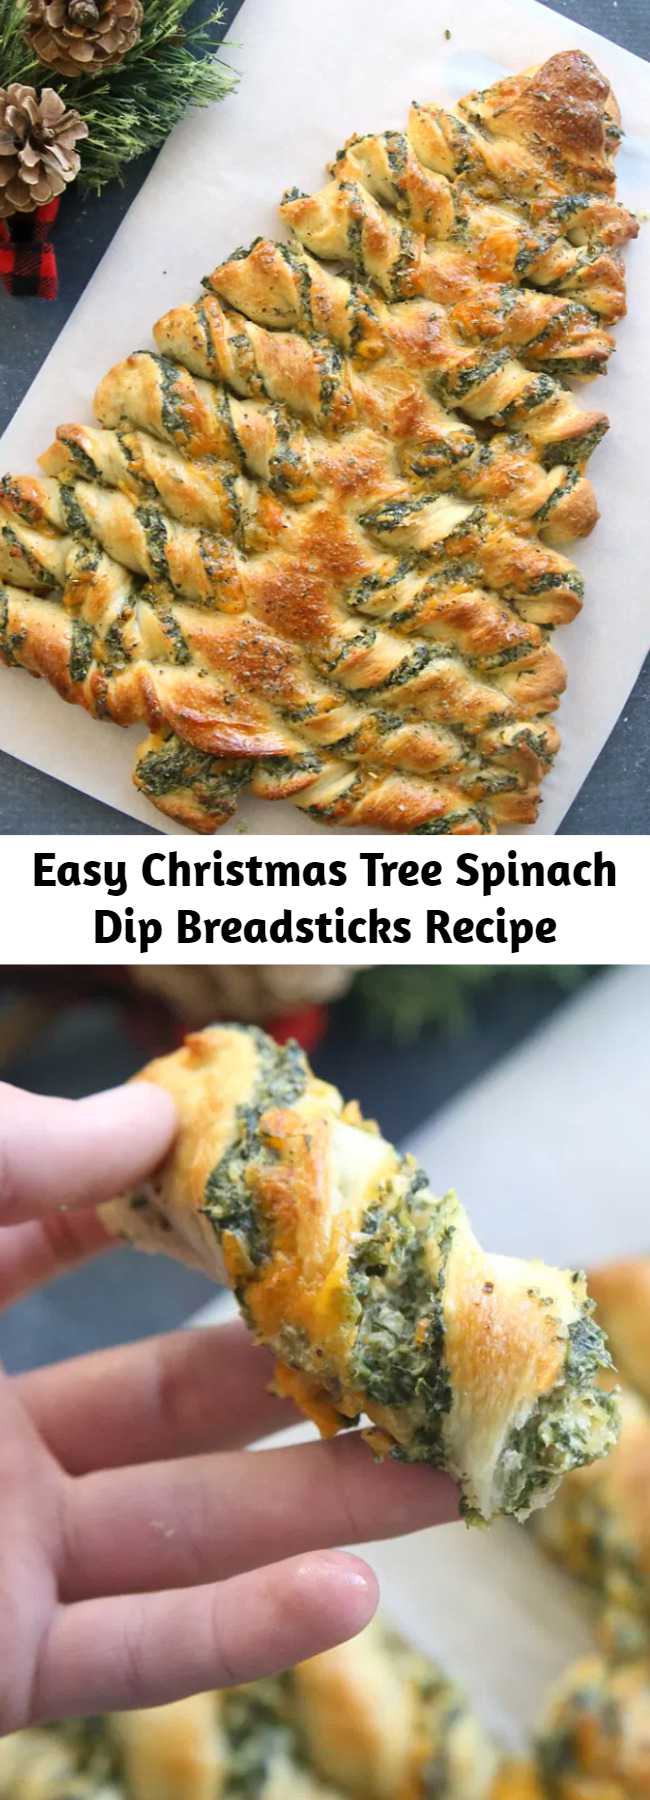 Easy Christmas Tree Spinach Dip Breadsticks Recipe - These Christmas tree breadsticks are the perfect party appetizer for the holidays! They're filled with spinach dip and topped with garlic butter. It looks so pretty and tastes absolutely delicious.